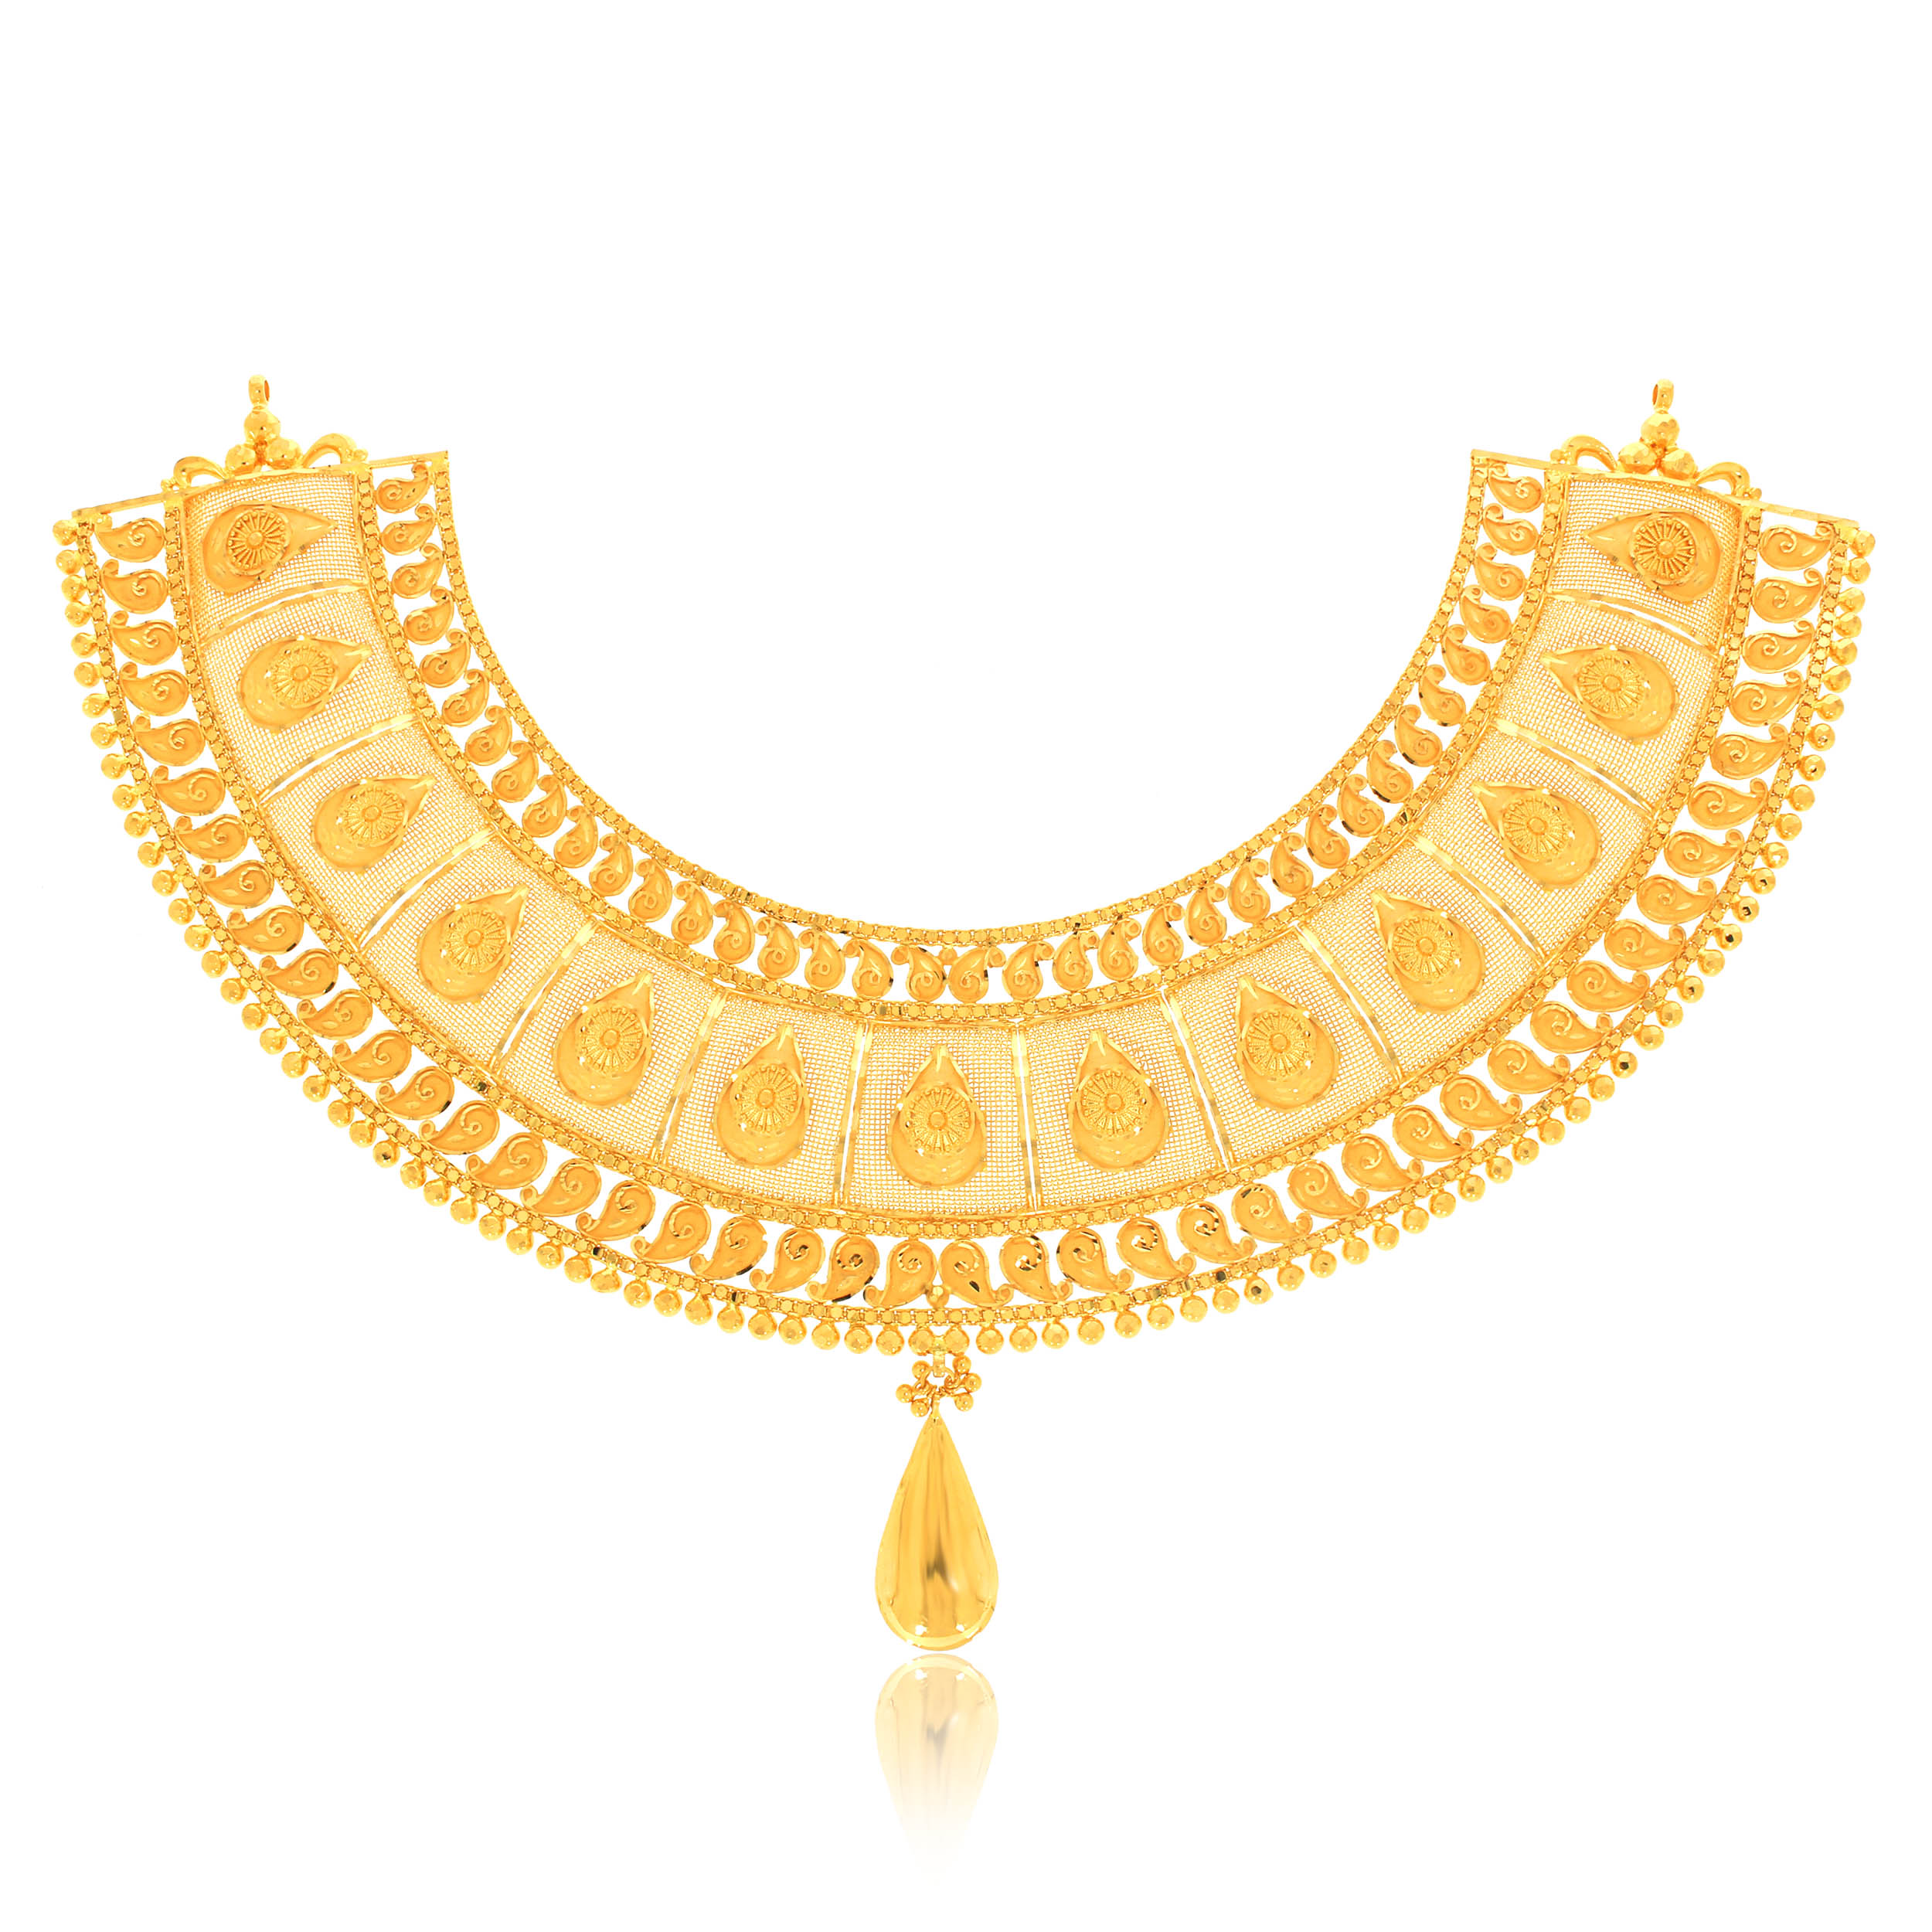 SHIHANT AABI JEWELS 22CT  BIS HALLMARK GOLD LONG NECKLACE FOR  W